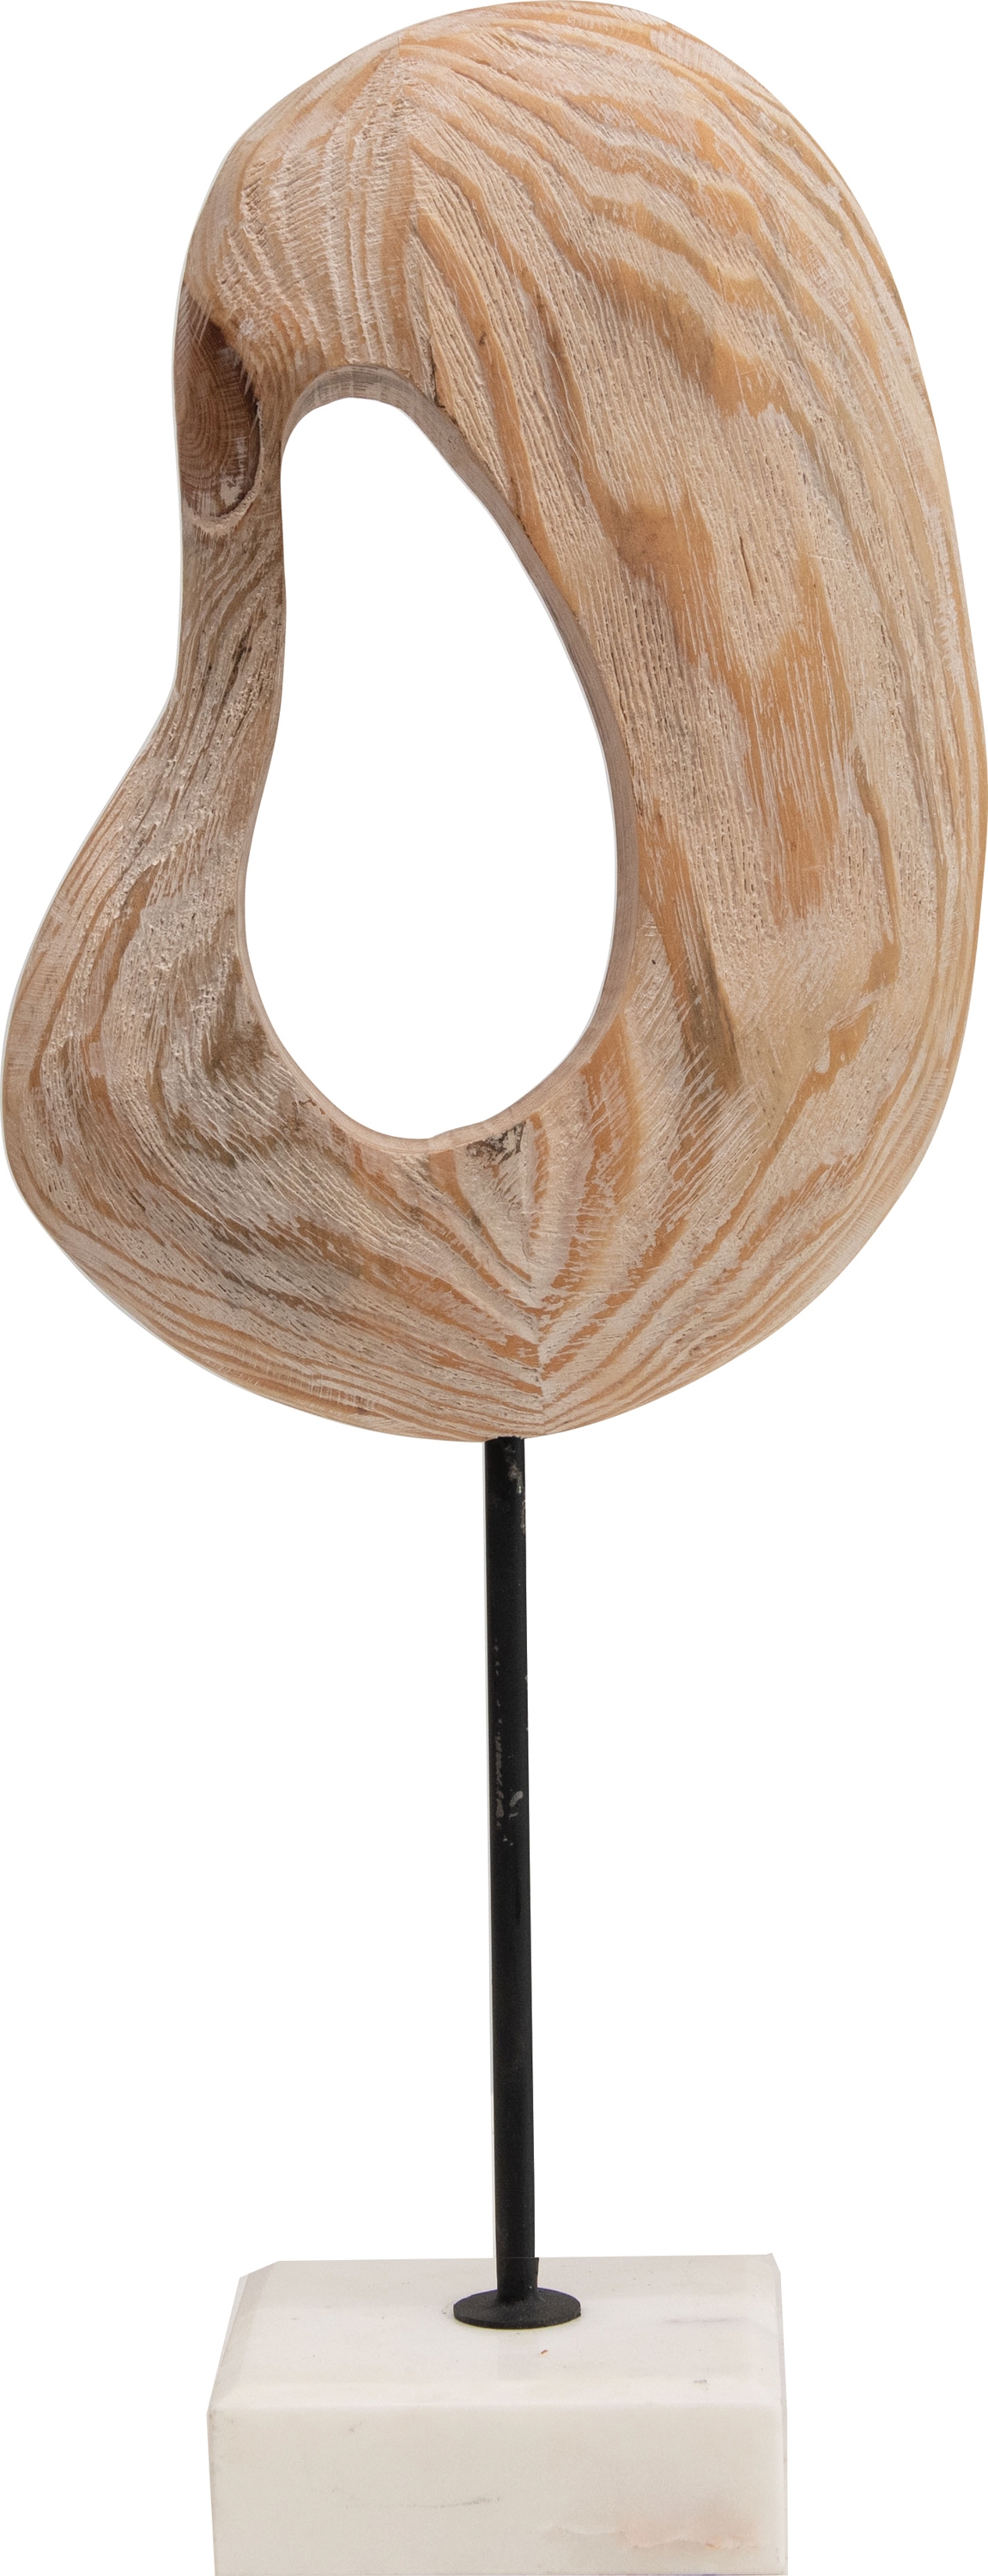 Abstract Hand-Carved Wood Art on White Marble Base - Image 0